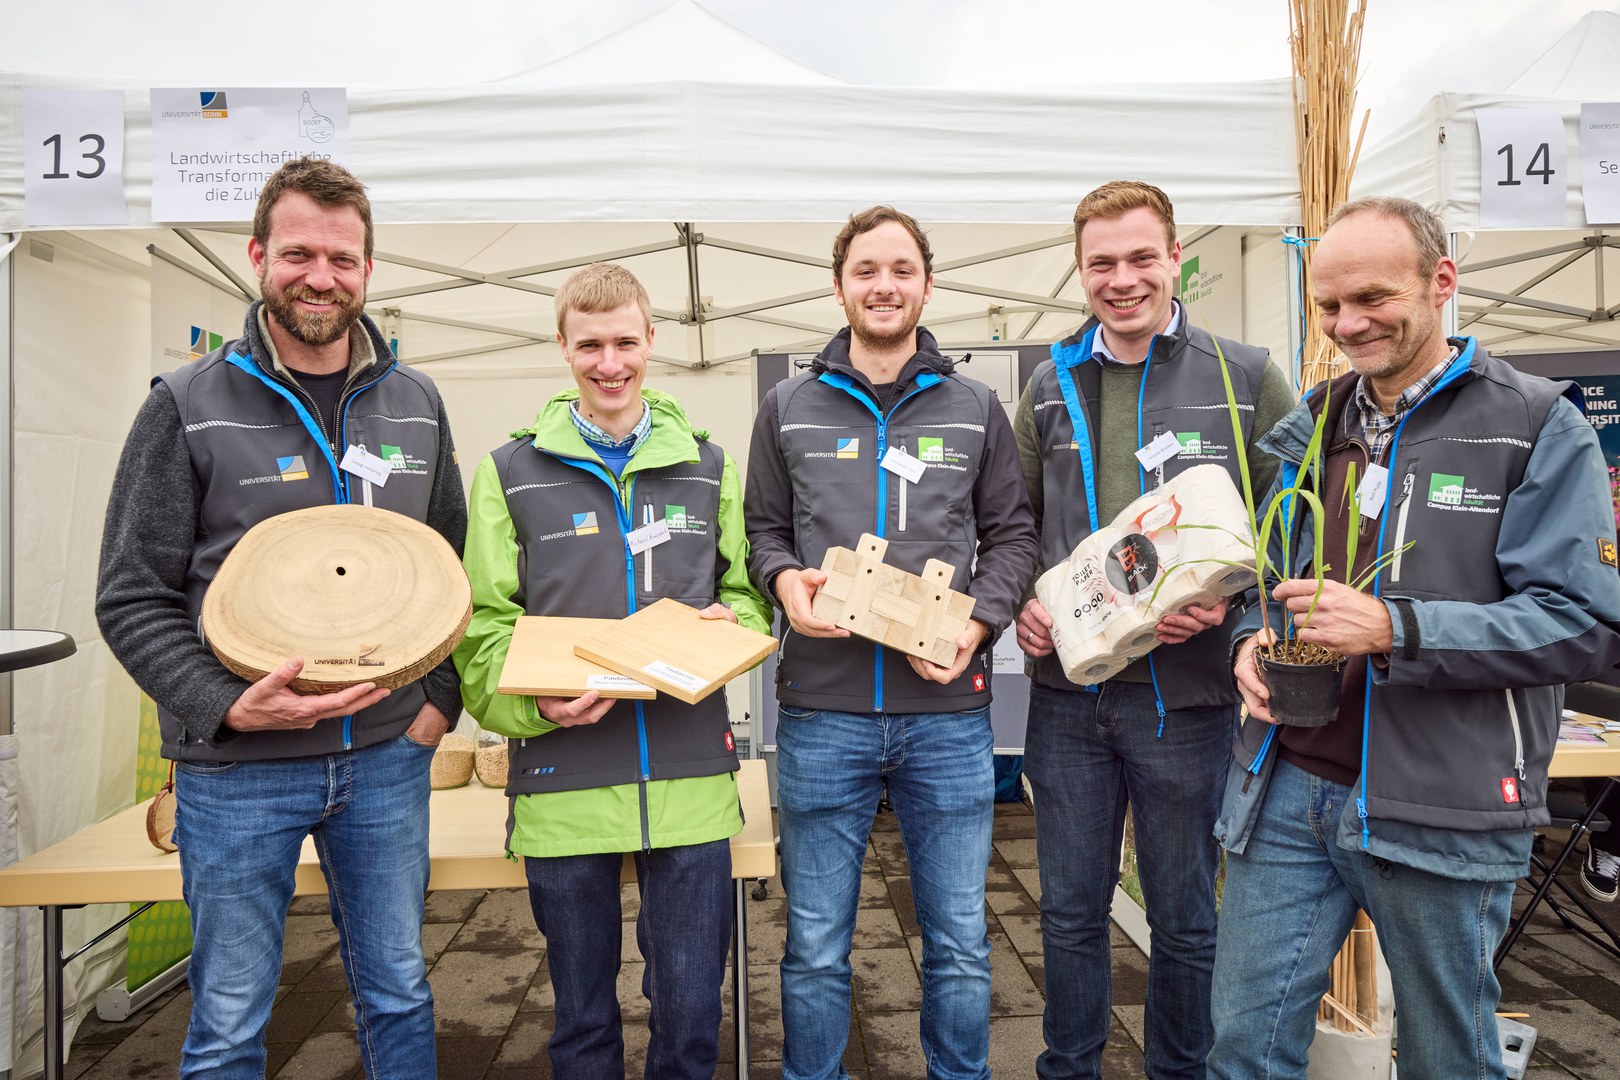 Staff from the Klein-Altendorf Campus showcased sustainable products made from miscanthus and paulownia